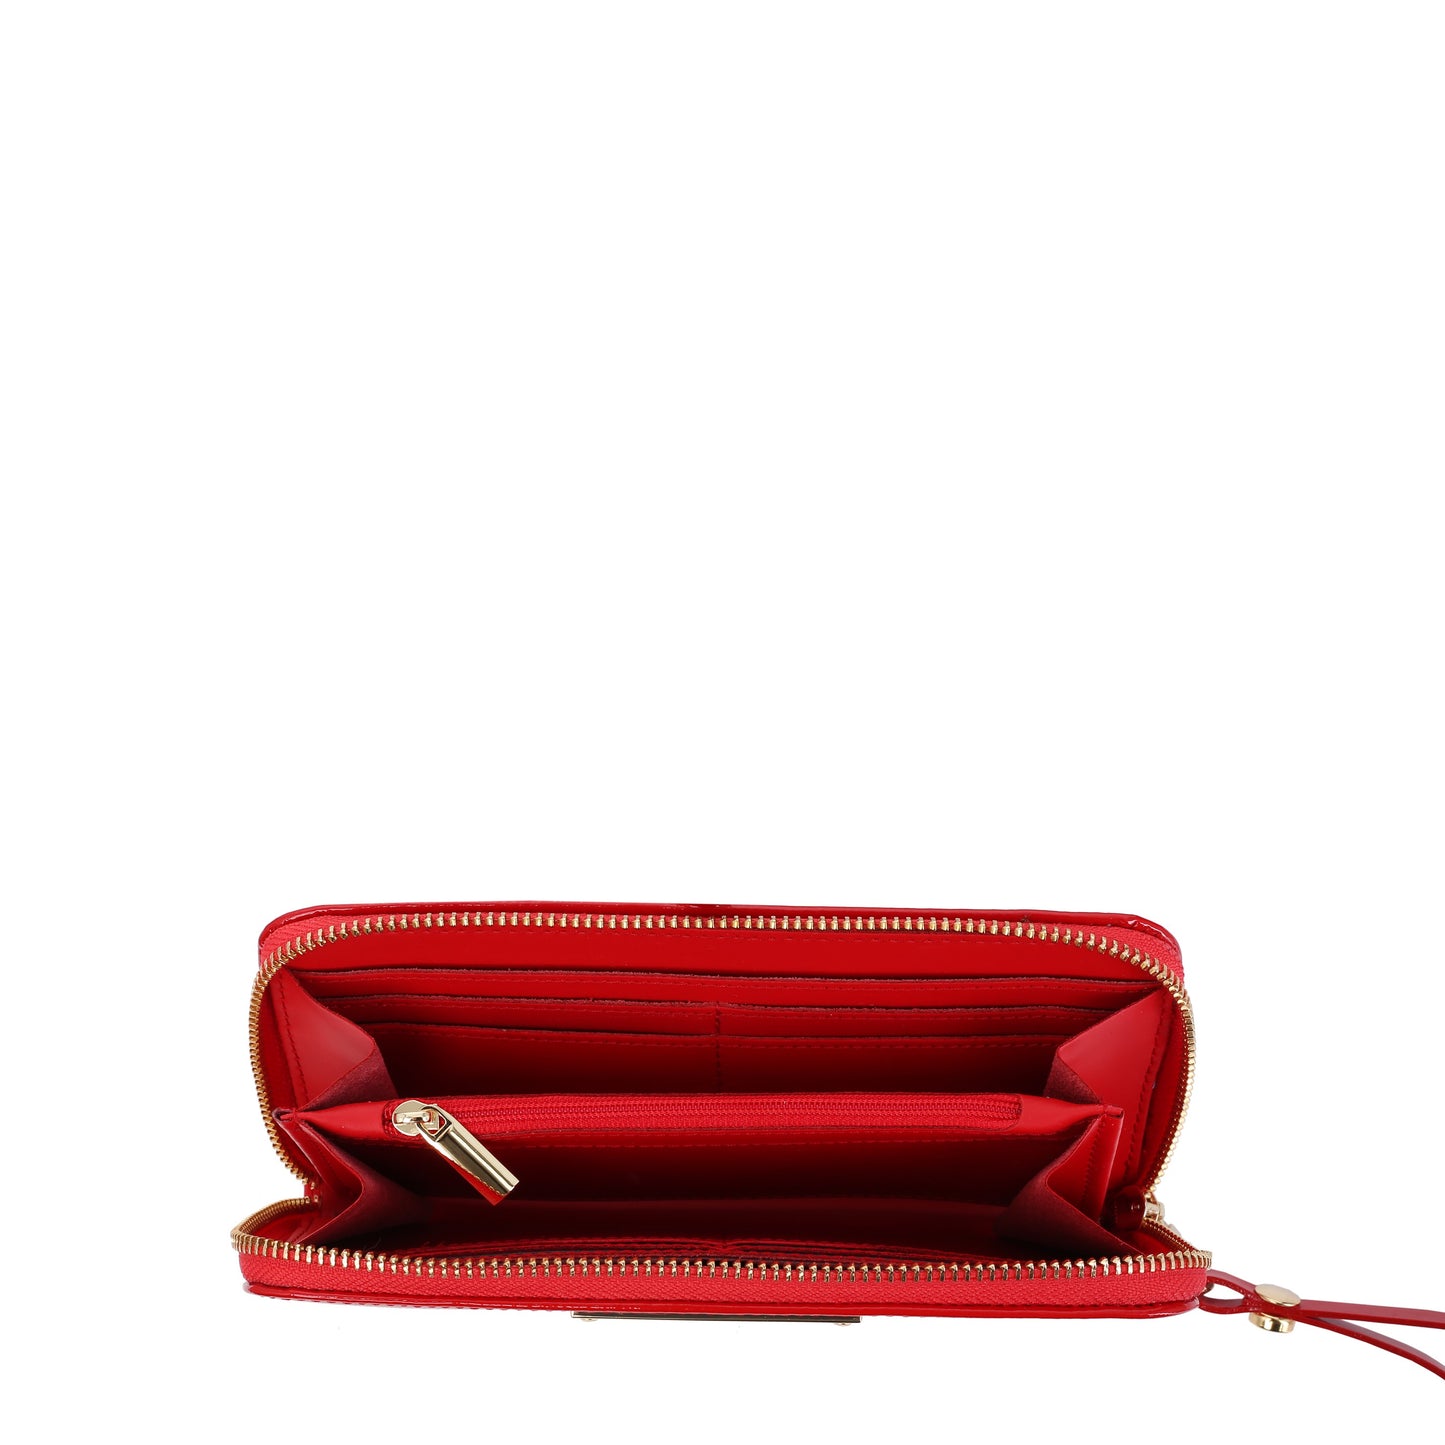 VERNICE RED women's leather wallet